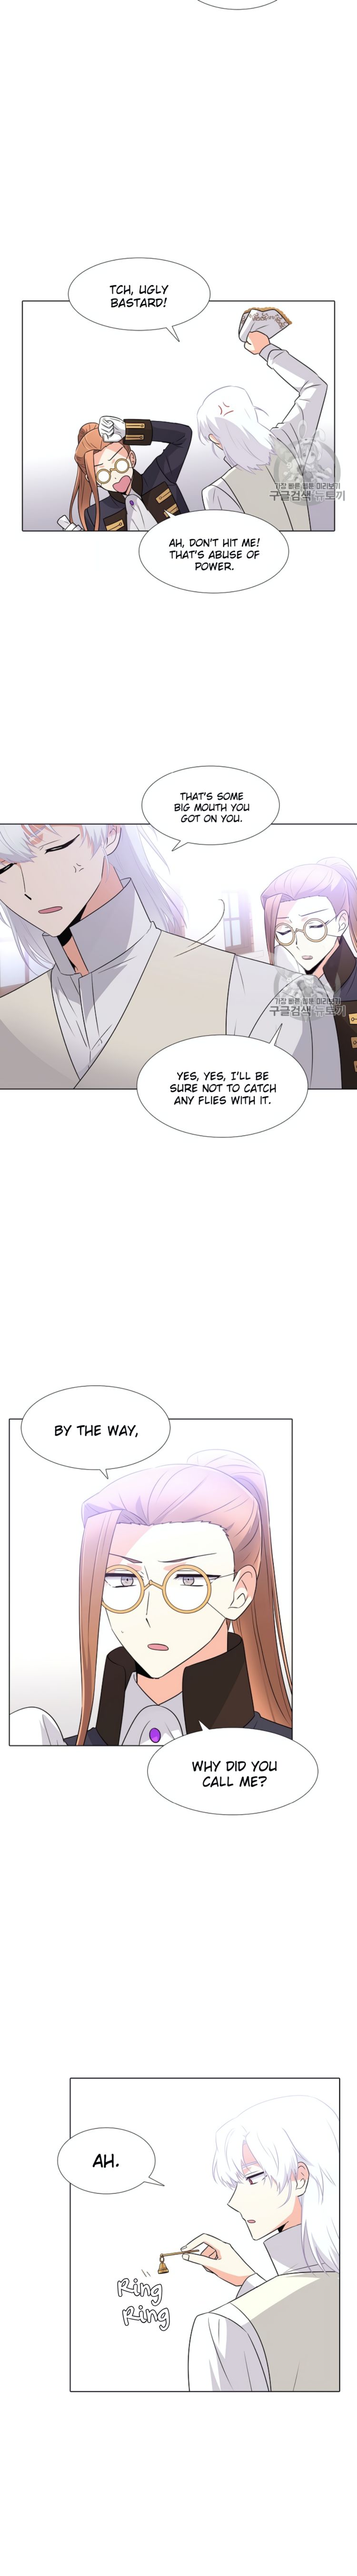 The Villain Discovered My Identity Chapter 6 - Page 8